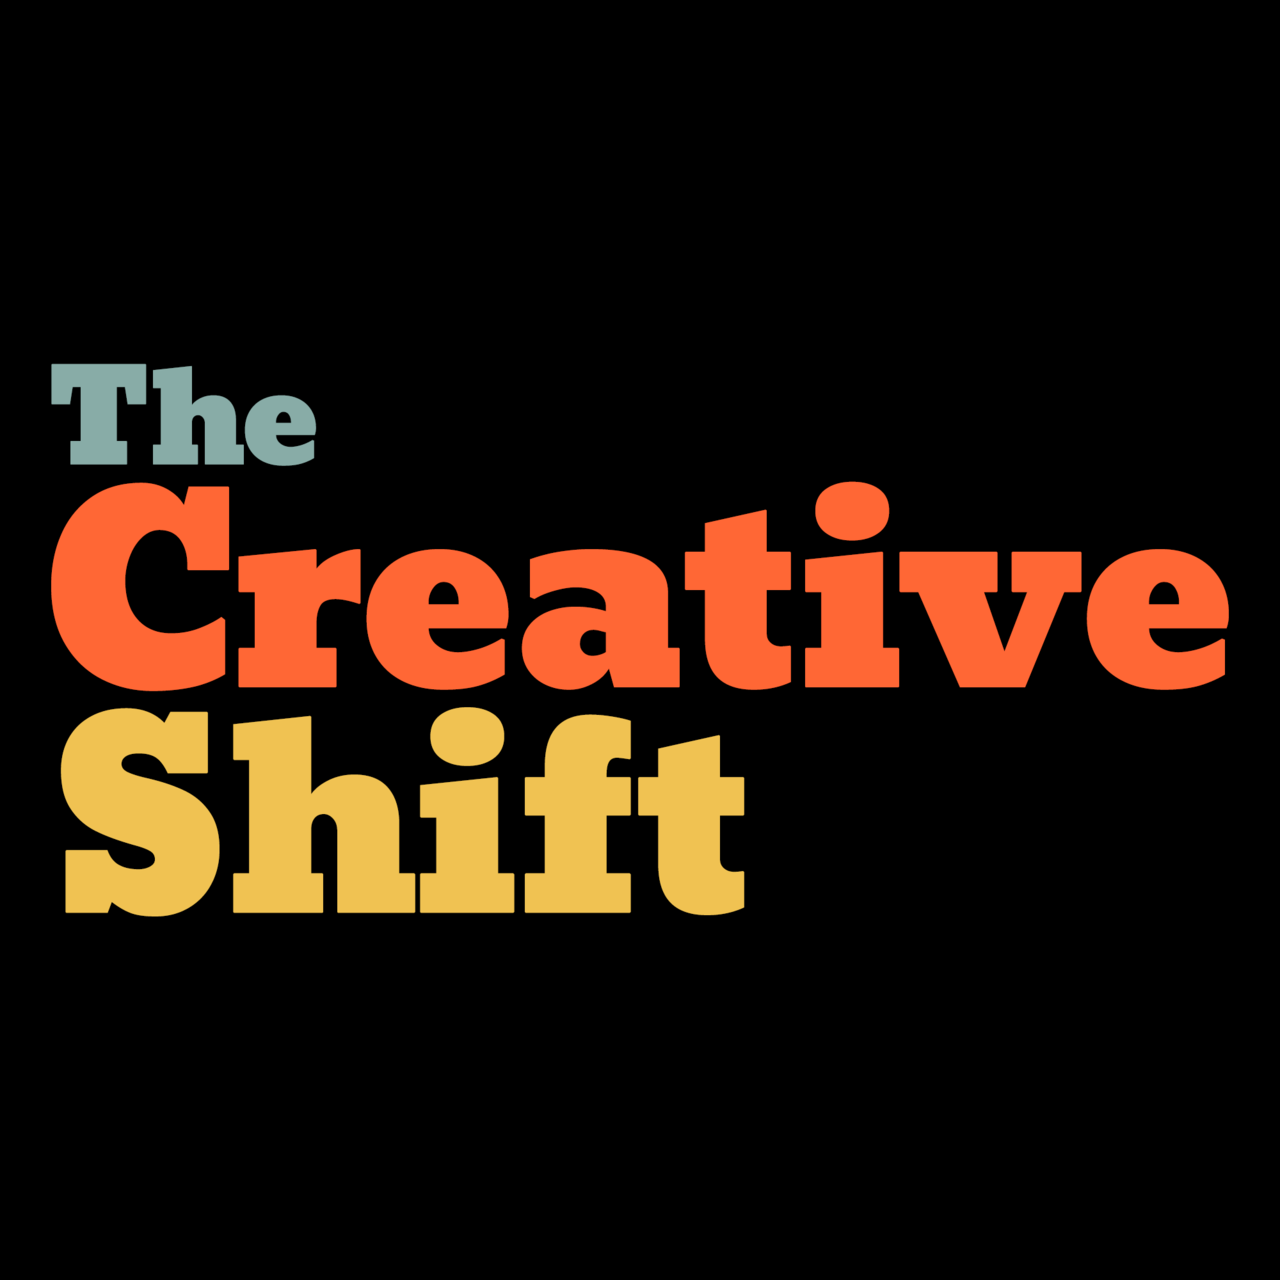 Artwork for The Creative Shift by Dan Blank